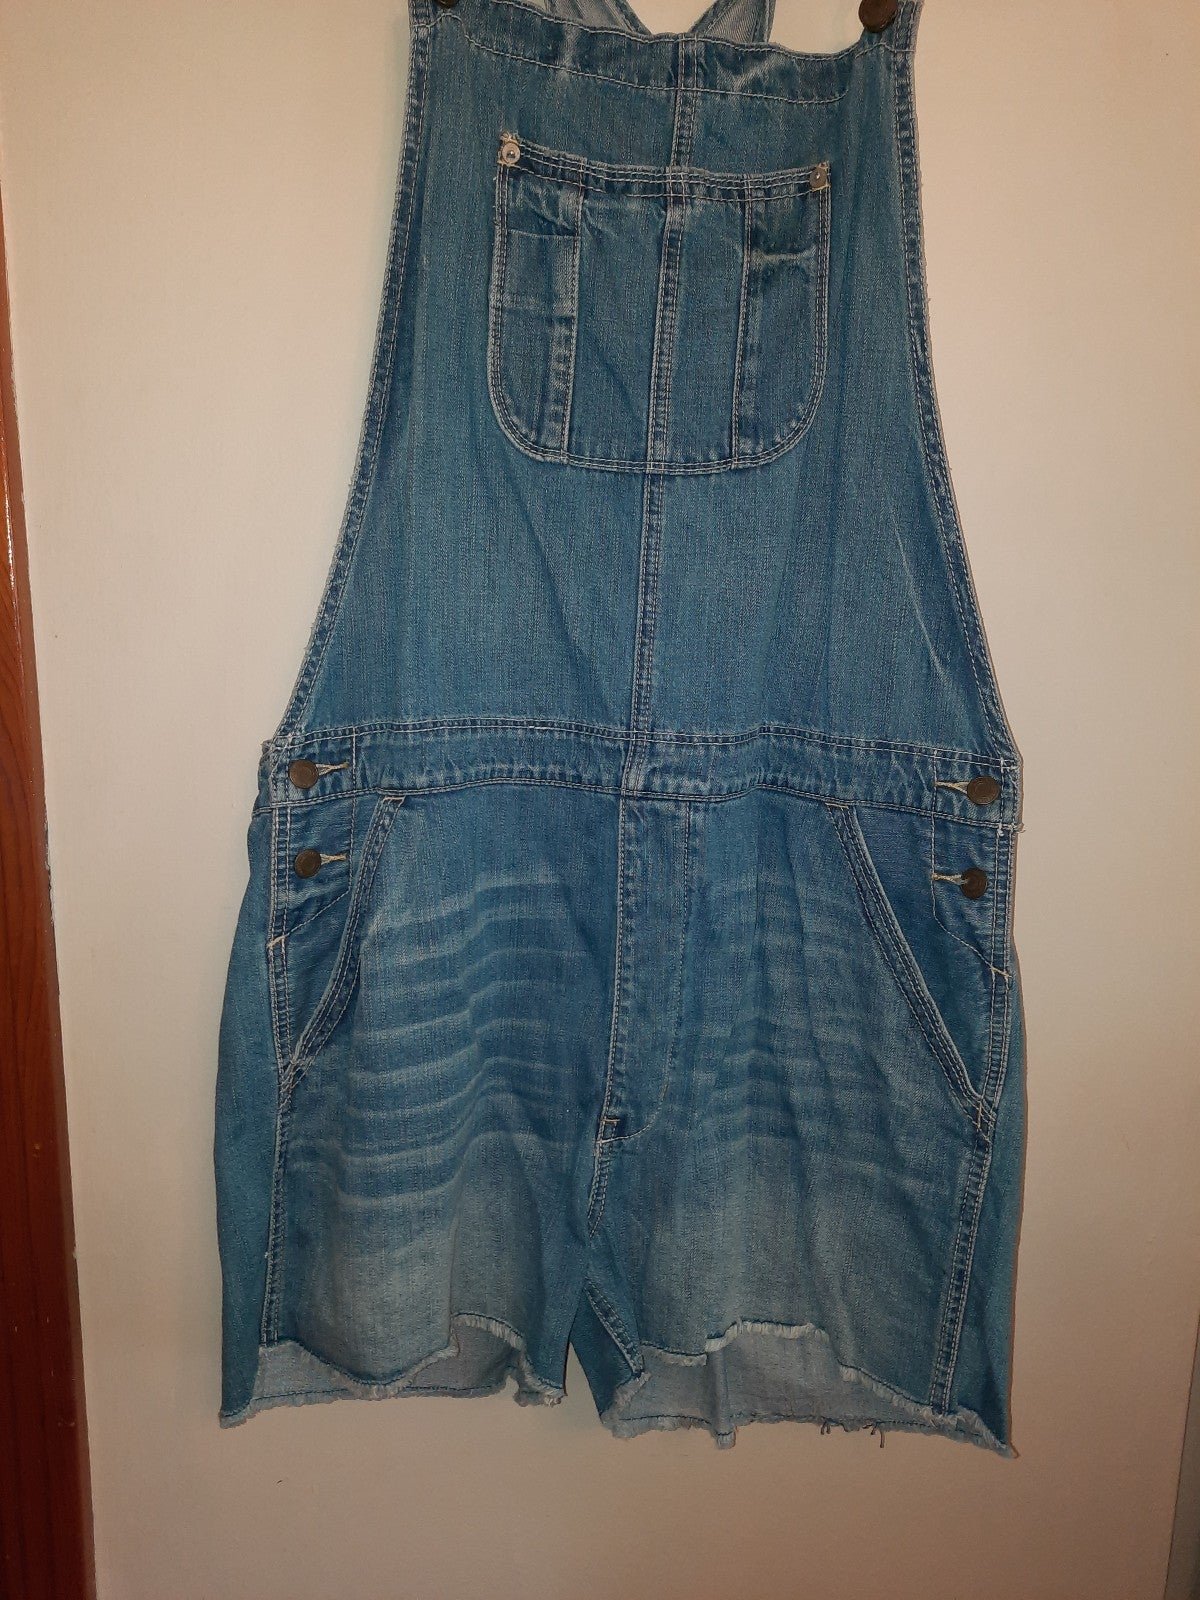 Gorgeous AE Overall Shorts o0Inh2DSe Online Shop